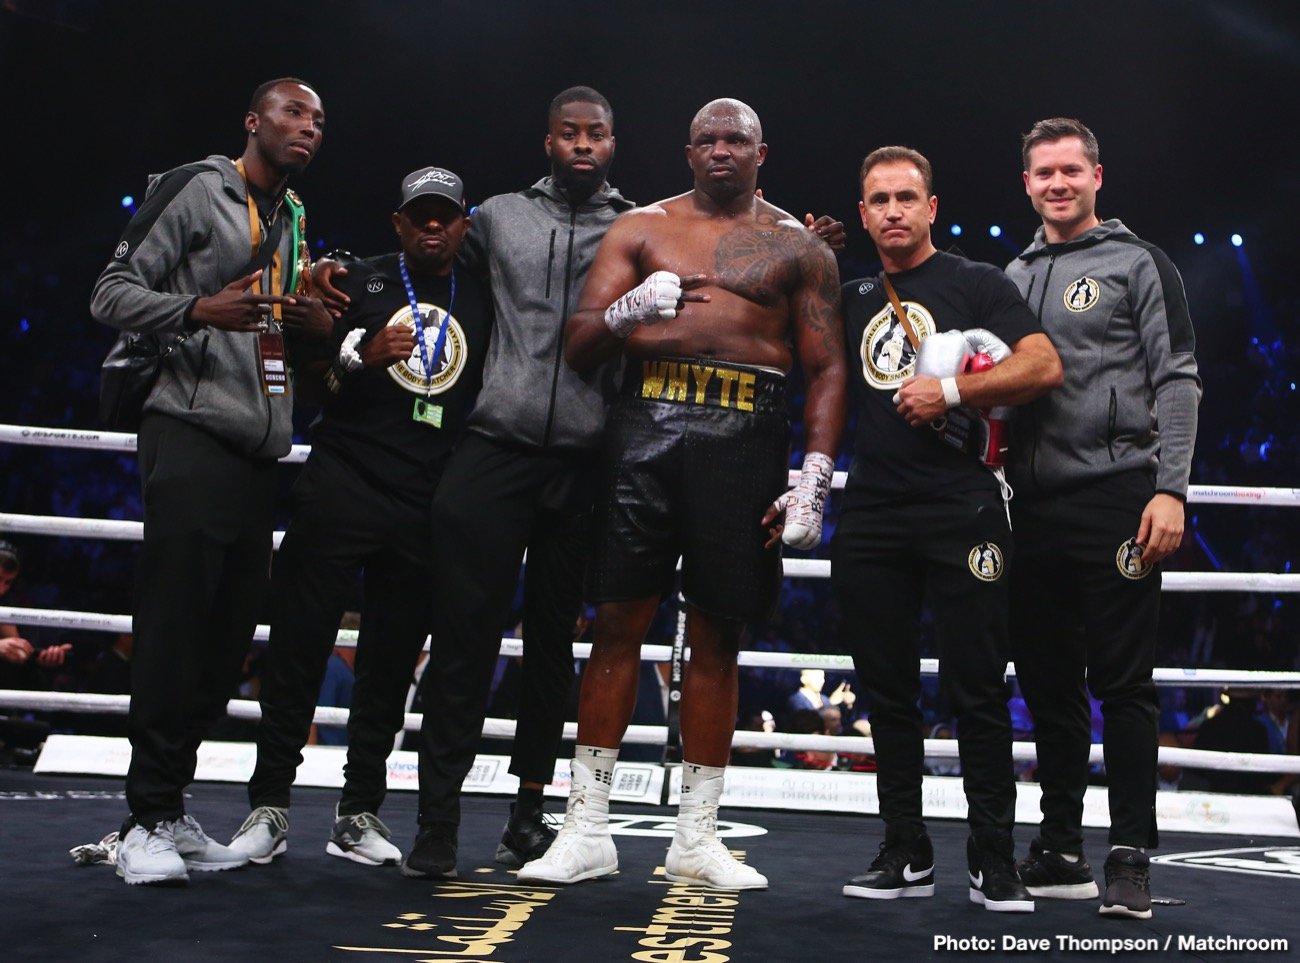 Image: Andy Ruiz Jr. would DEMOLISH Dillian Whyte - Kevin Barry